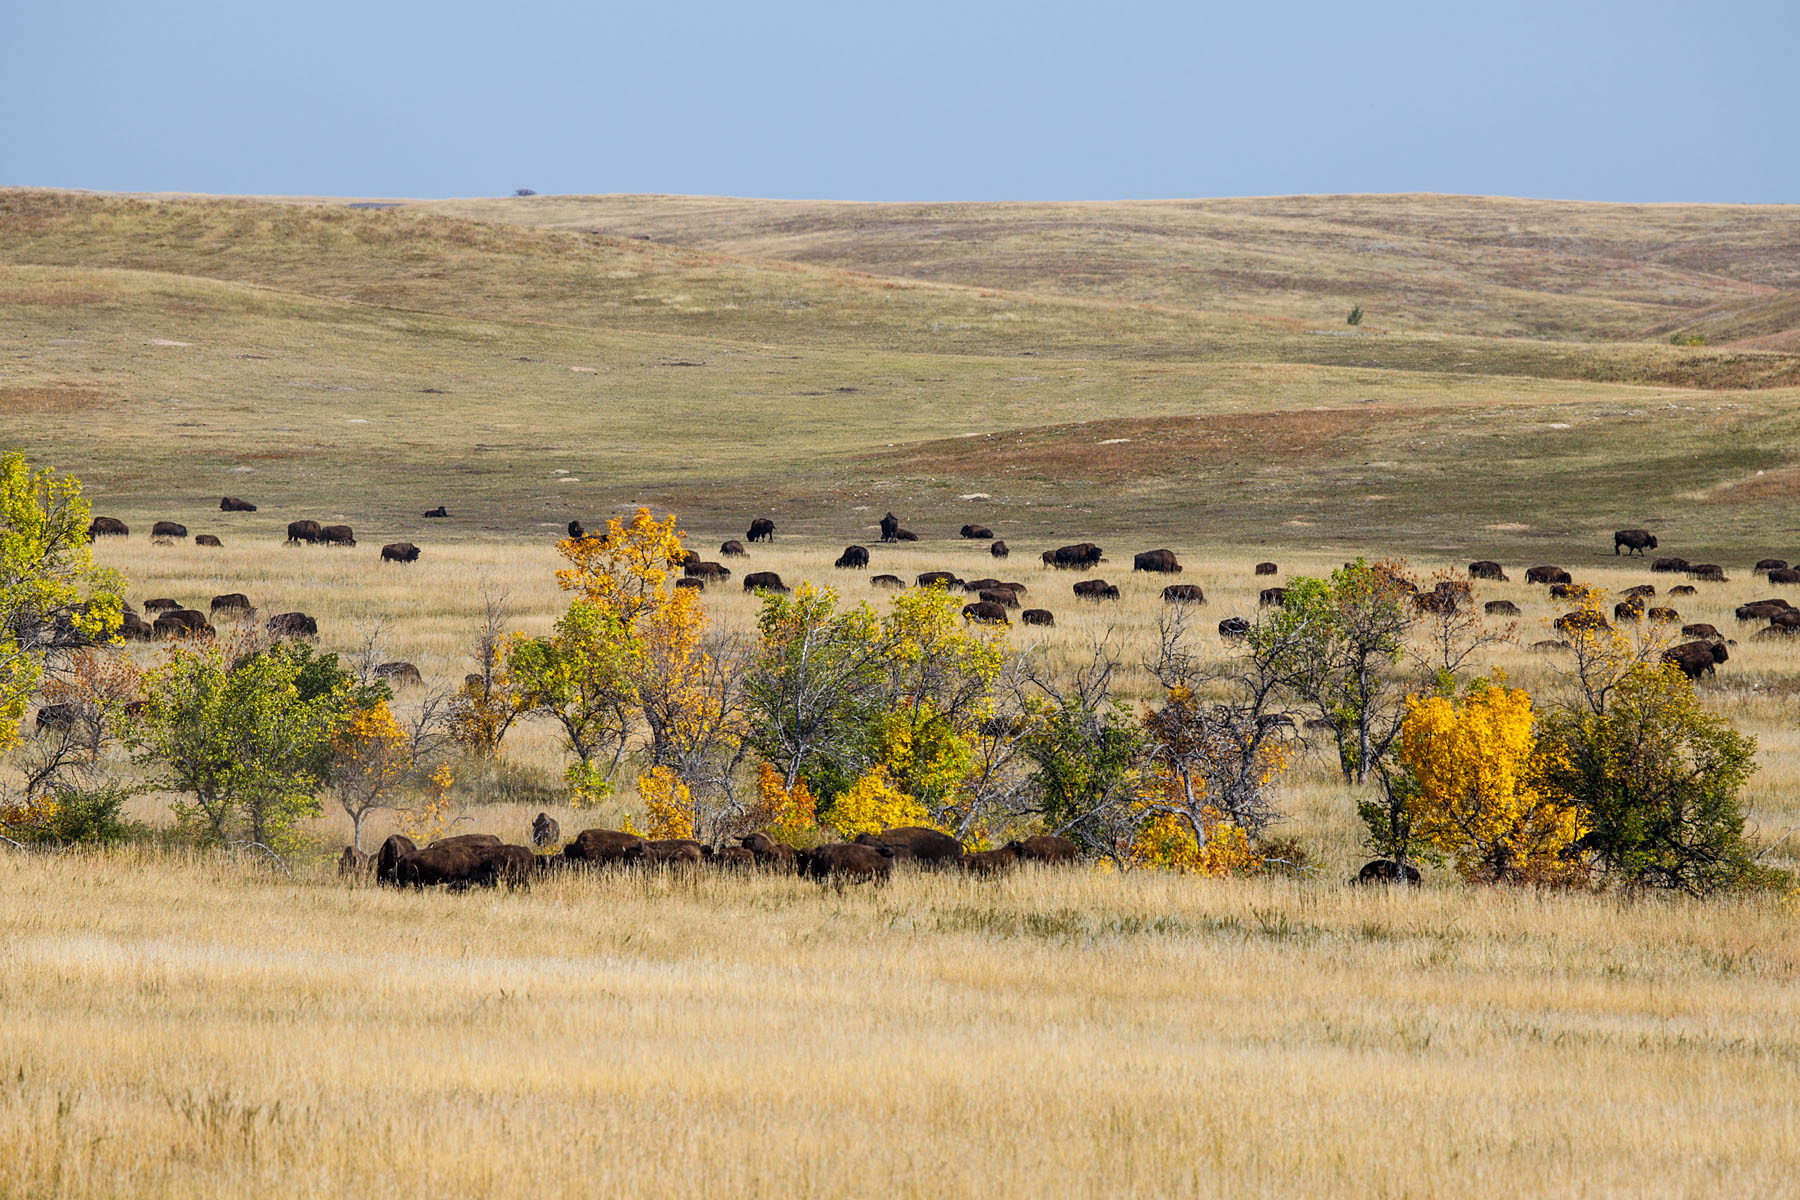 View of the bison herd from the new Bison Center, Custer State Park, the day after the annual roundup.  Click for next photo.